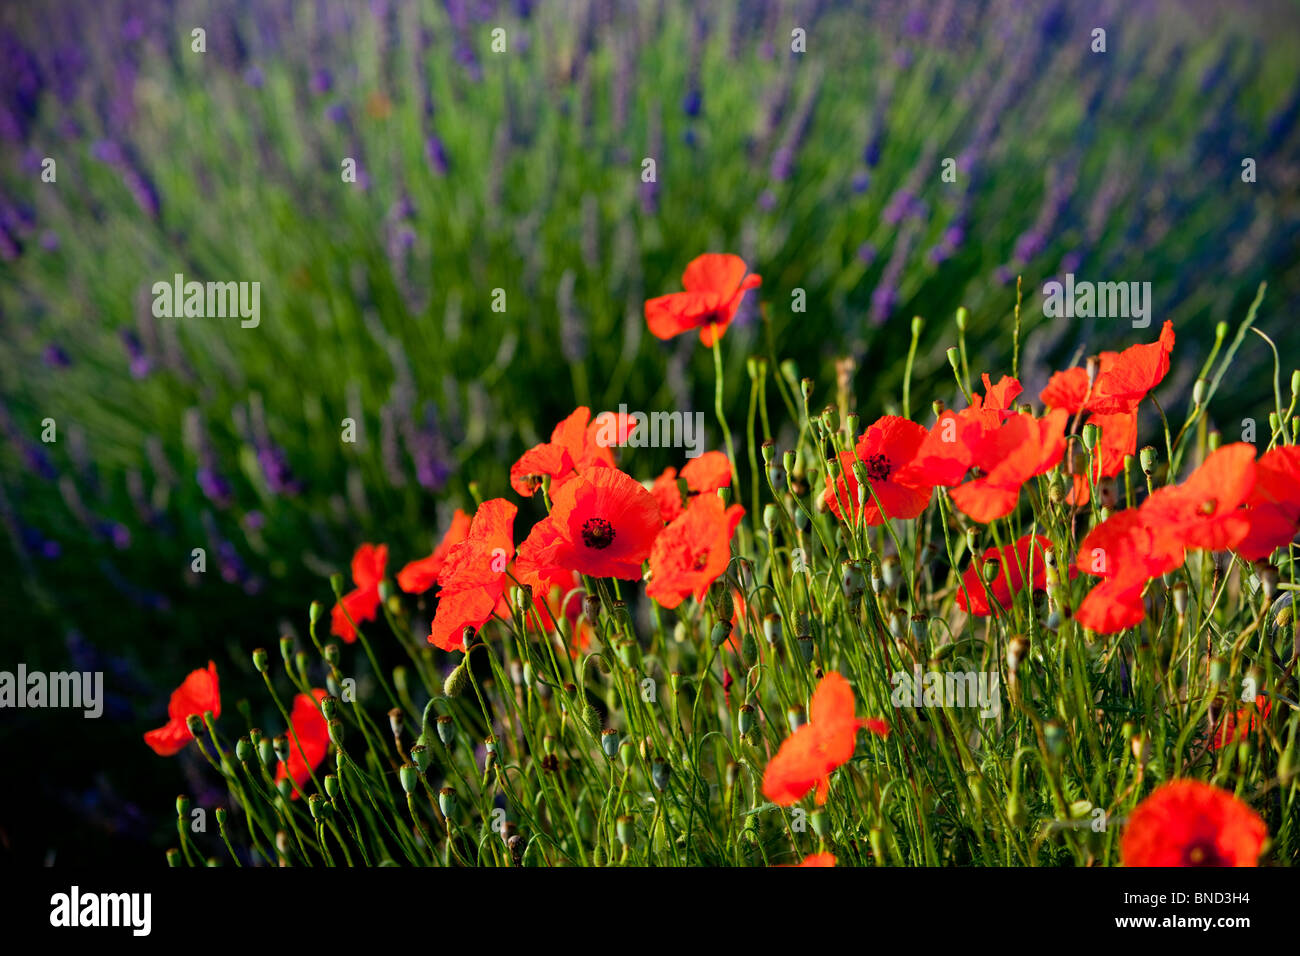 Poppies growing in the middle of a field of lavender along the Valensole Plateau, Provence France Stock Photo